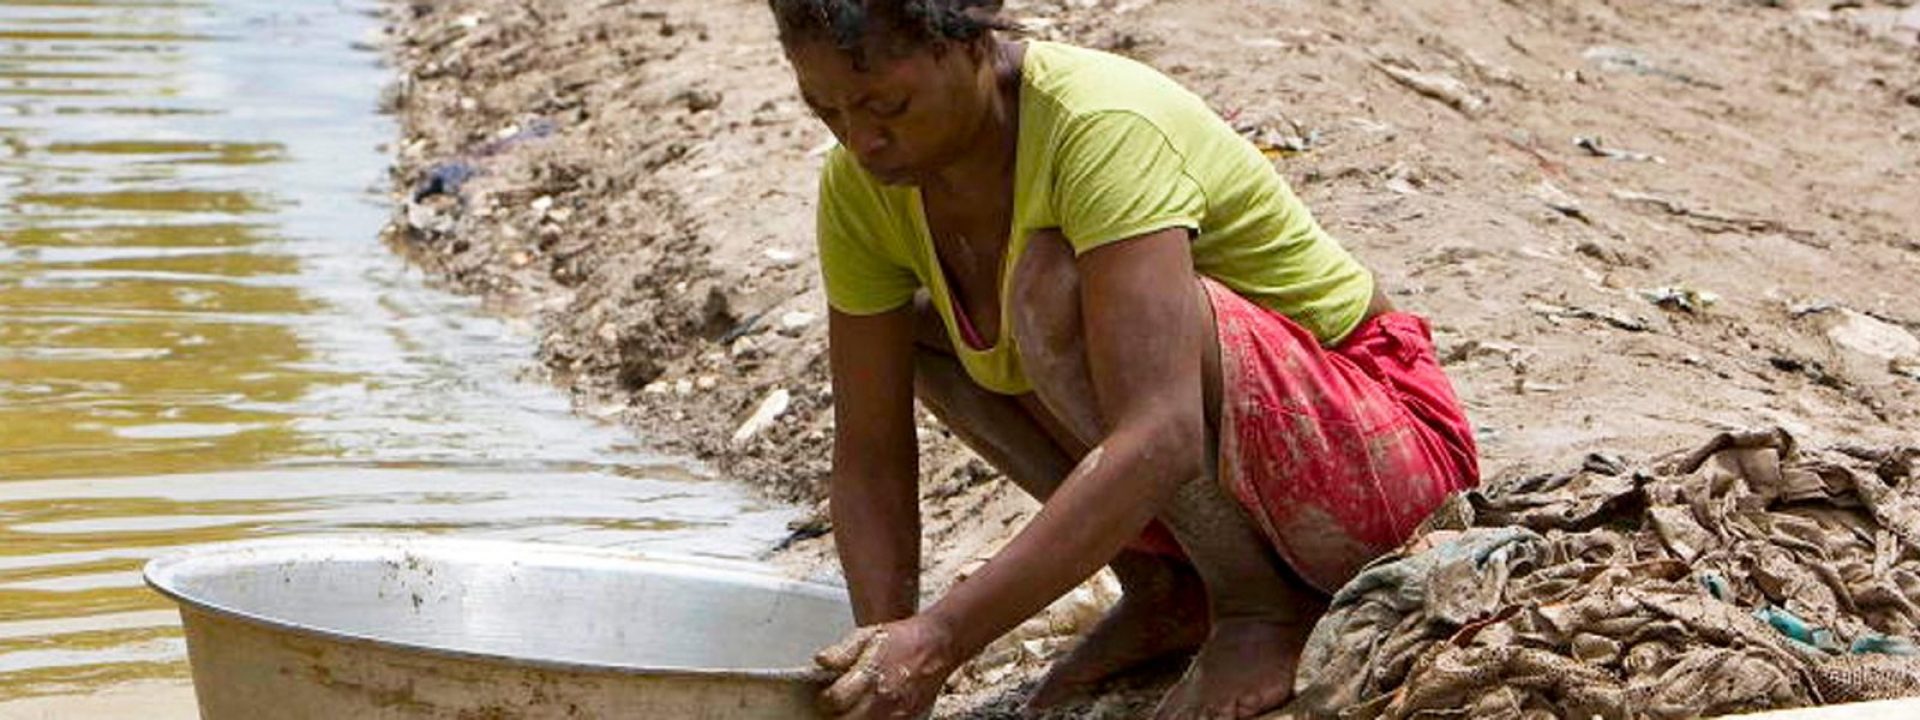 Water and sanitation for gender equality